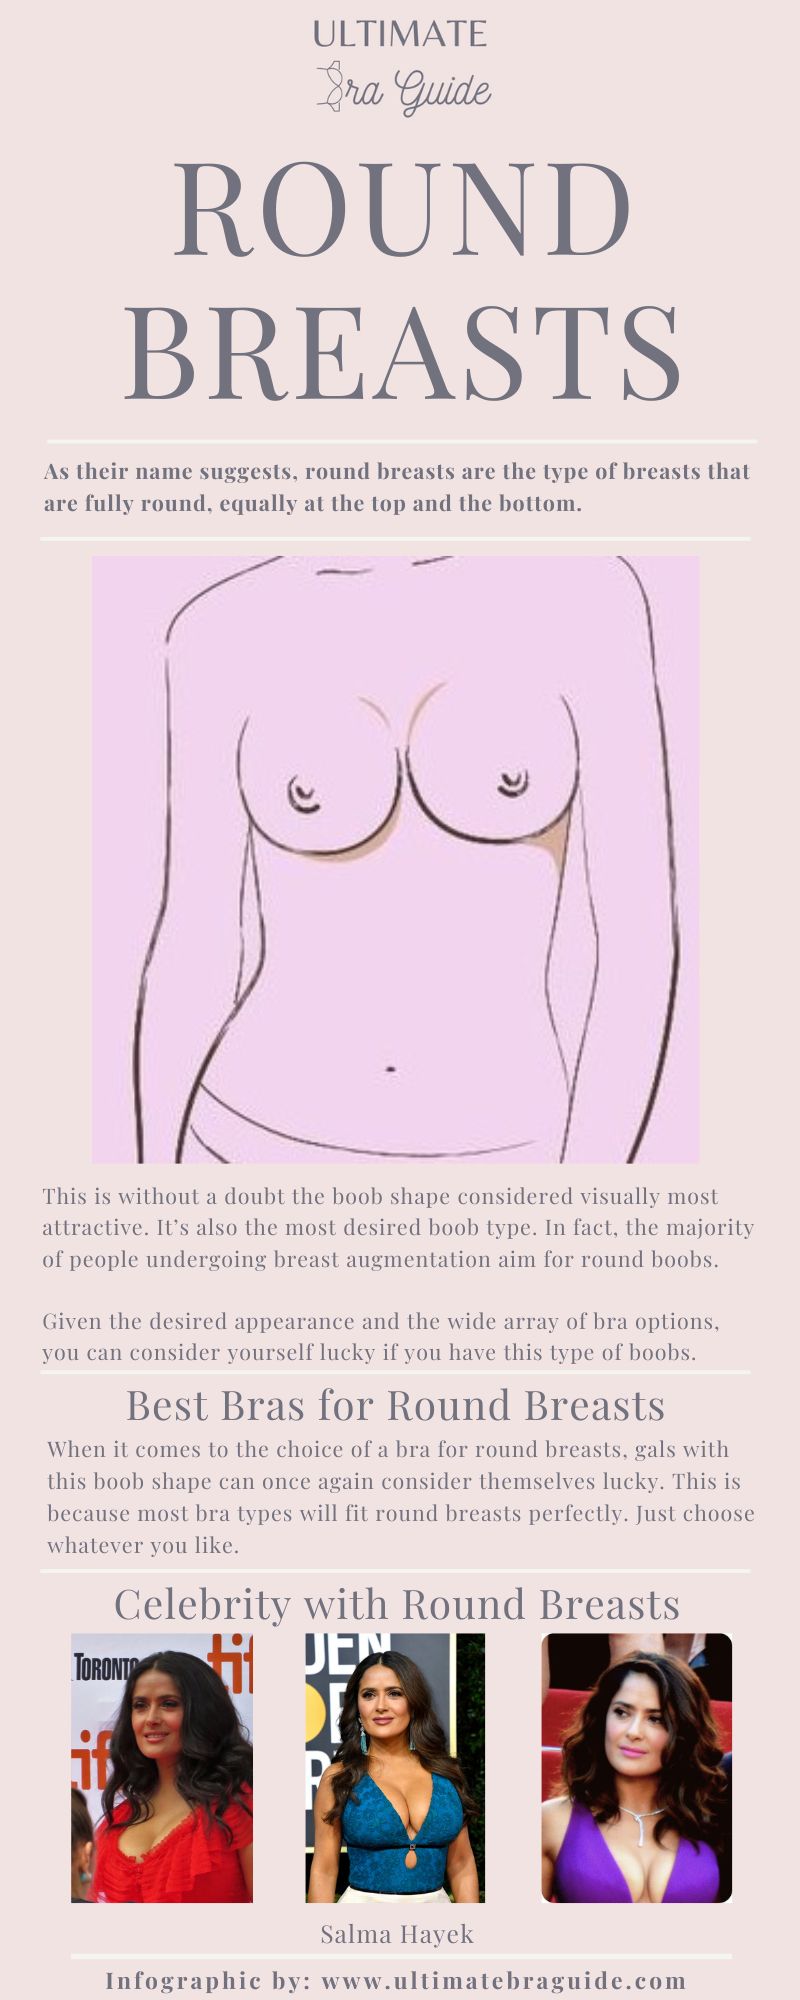 An infographic about round breasts - what they are, what they look like, what are the best bras for them, and some celebrities with round breasts